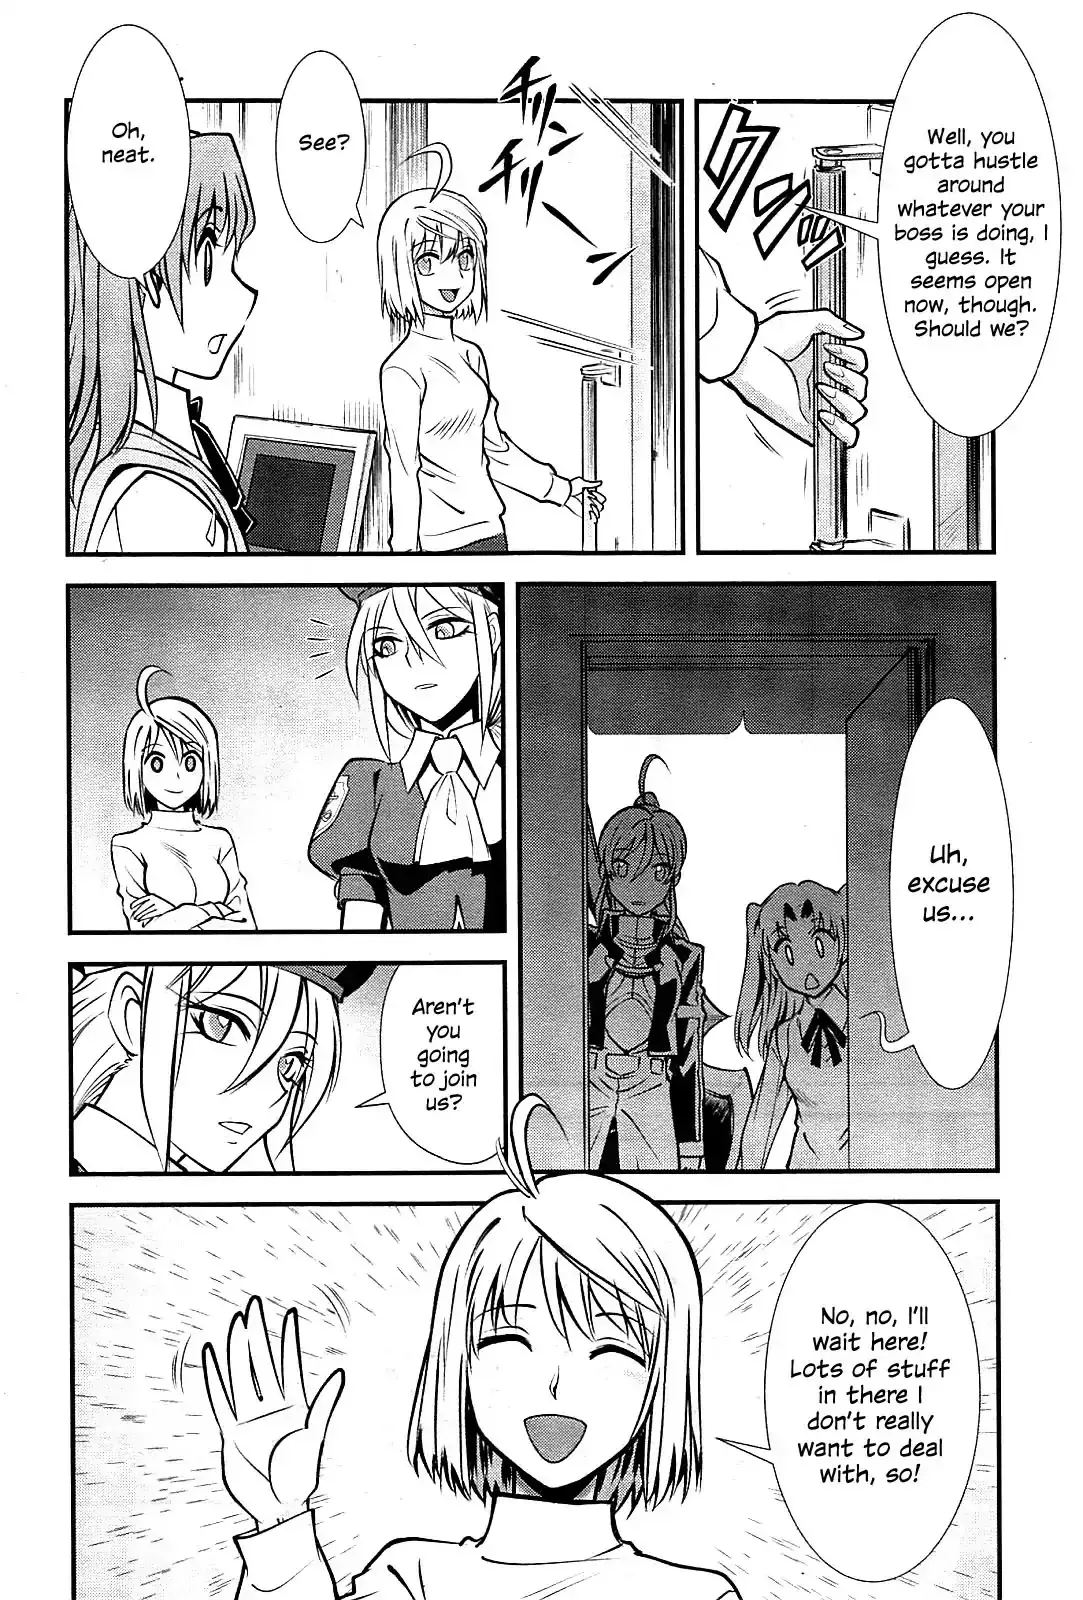 Melty Blood - Back Alley Alliance Nightmare - 1 page 17